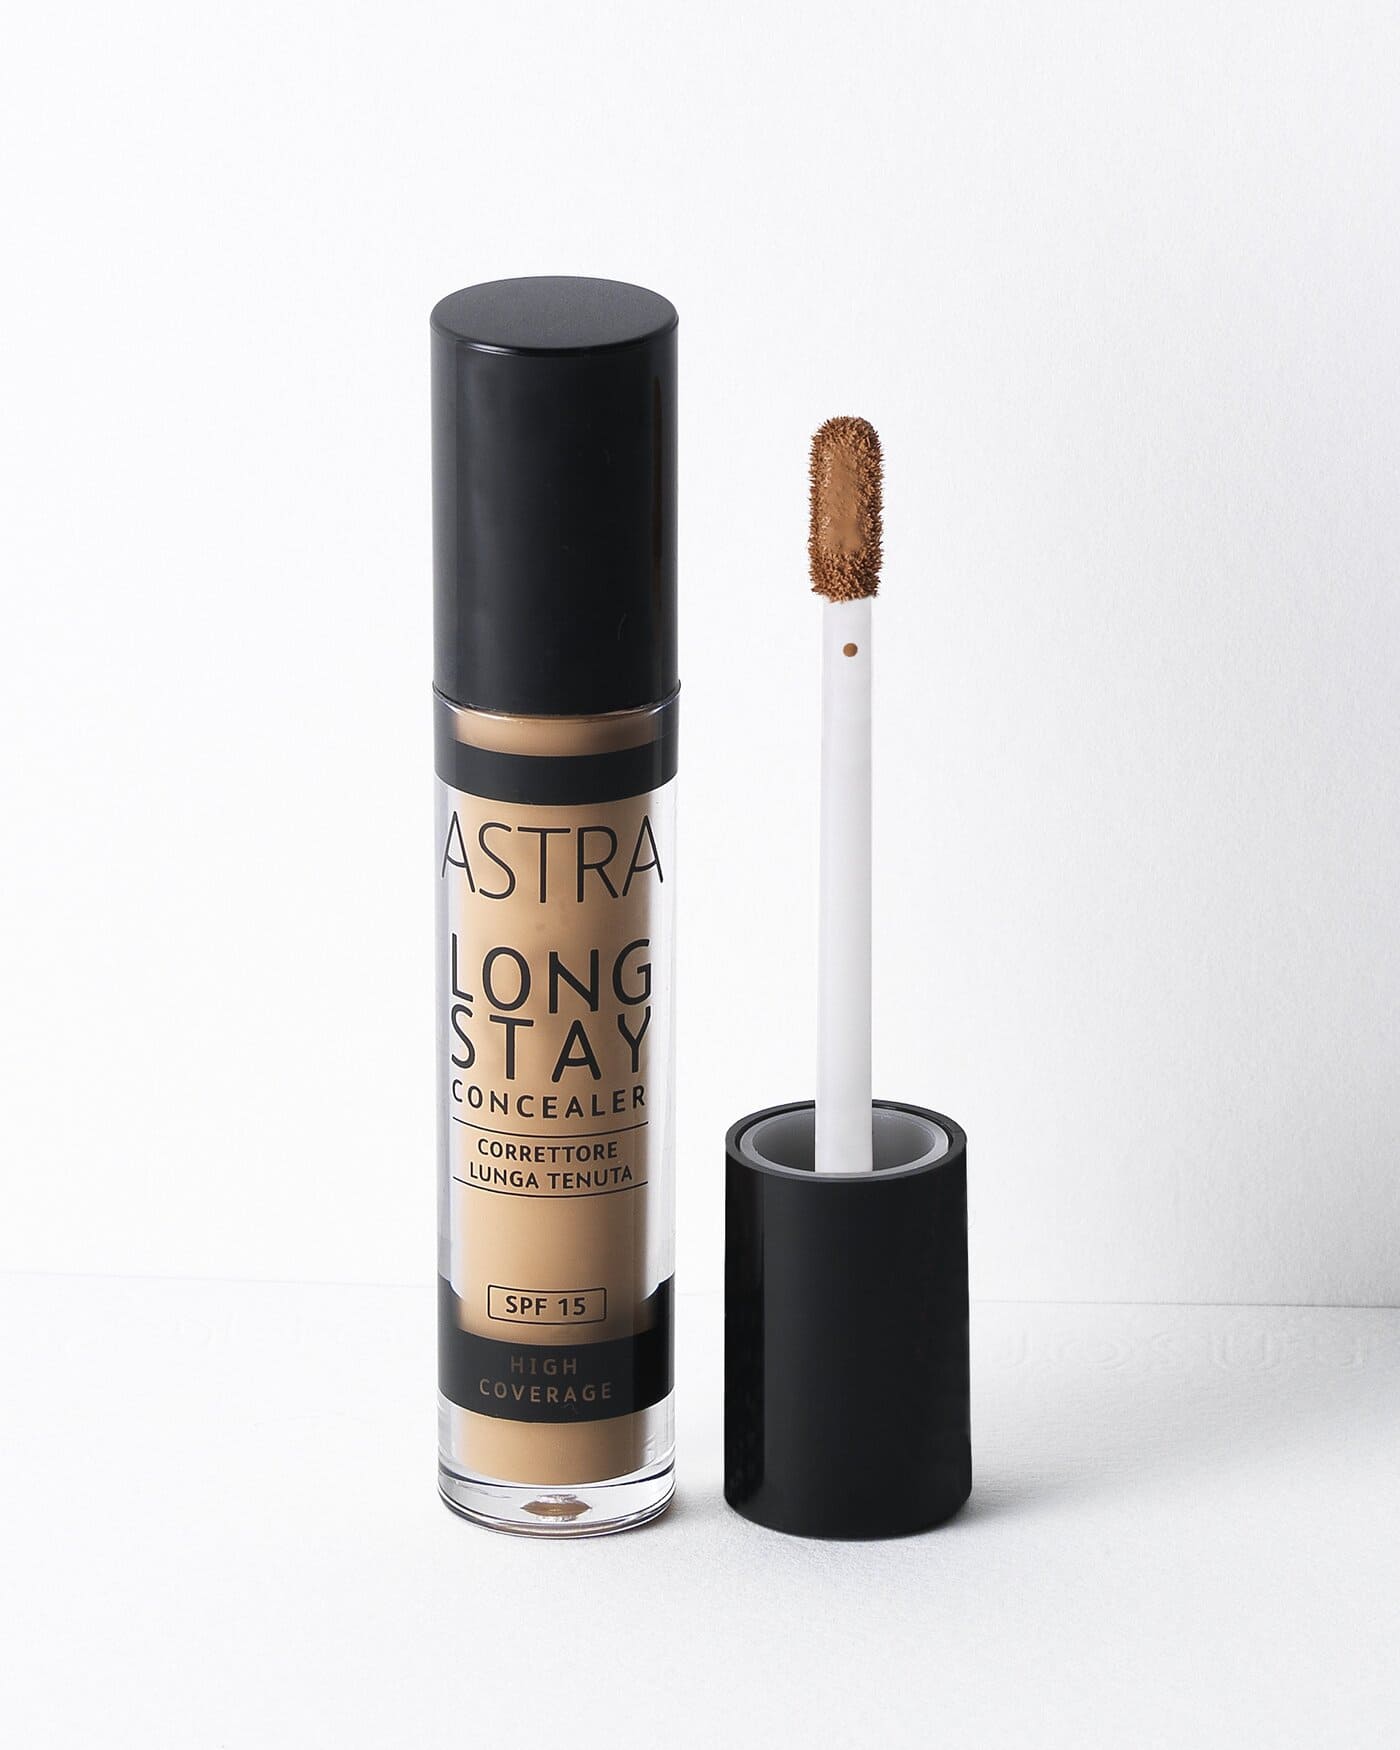 LONG STAY CONCEALER - Correttore Lunga Tenuta - 07W - Toasted - Astra Make-Up